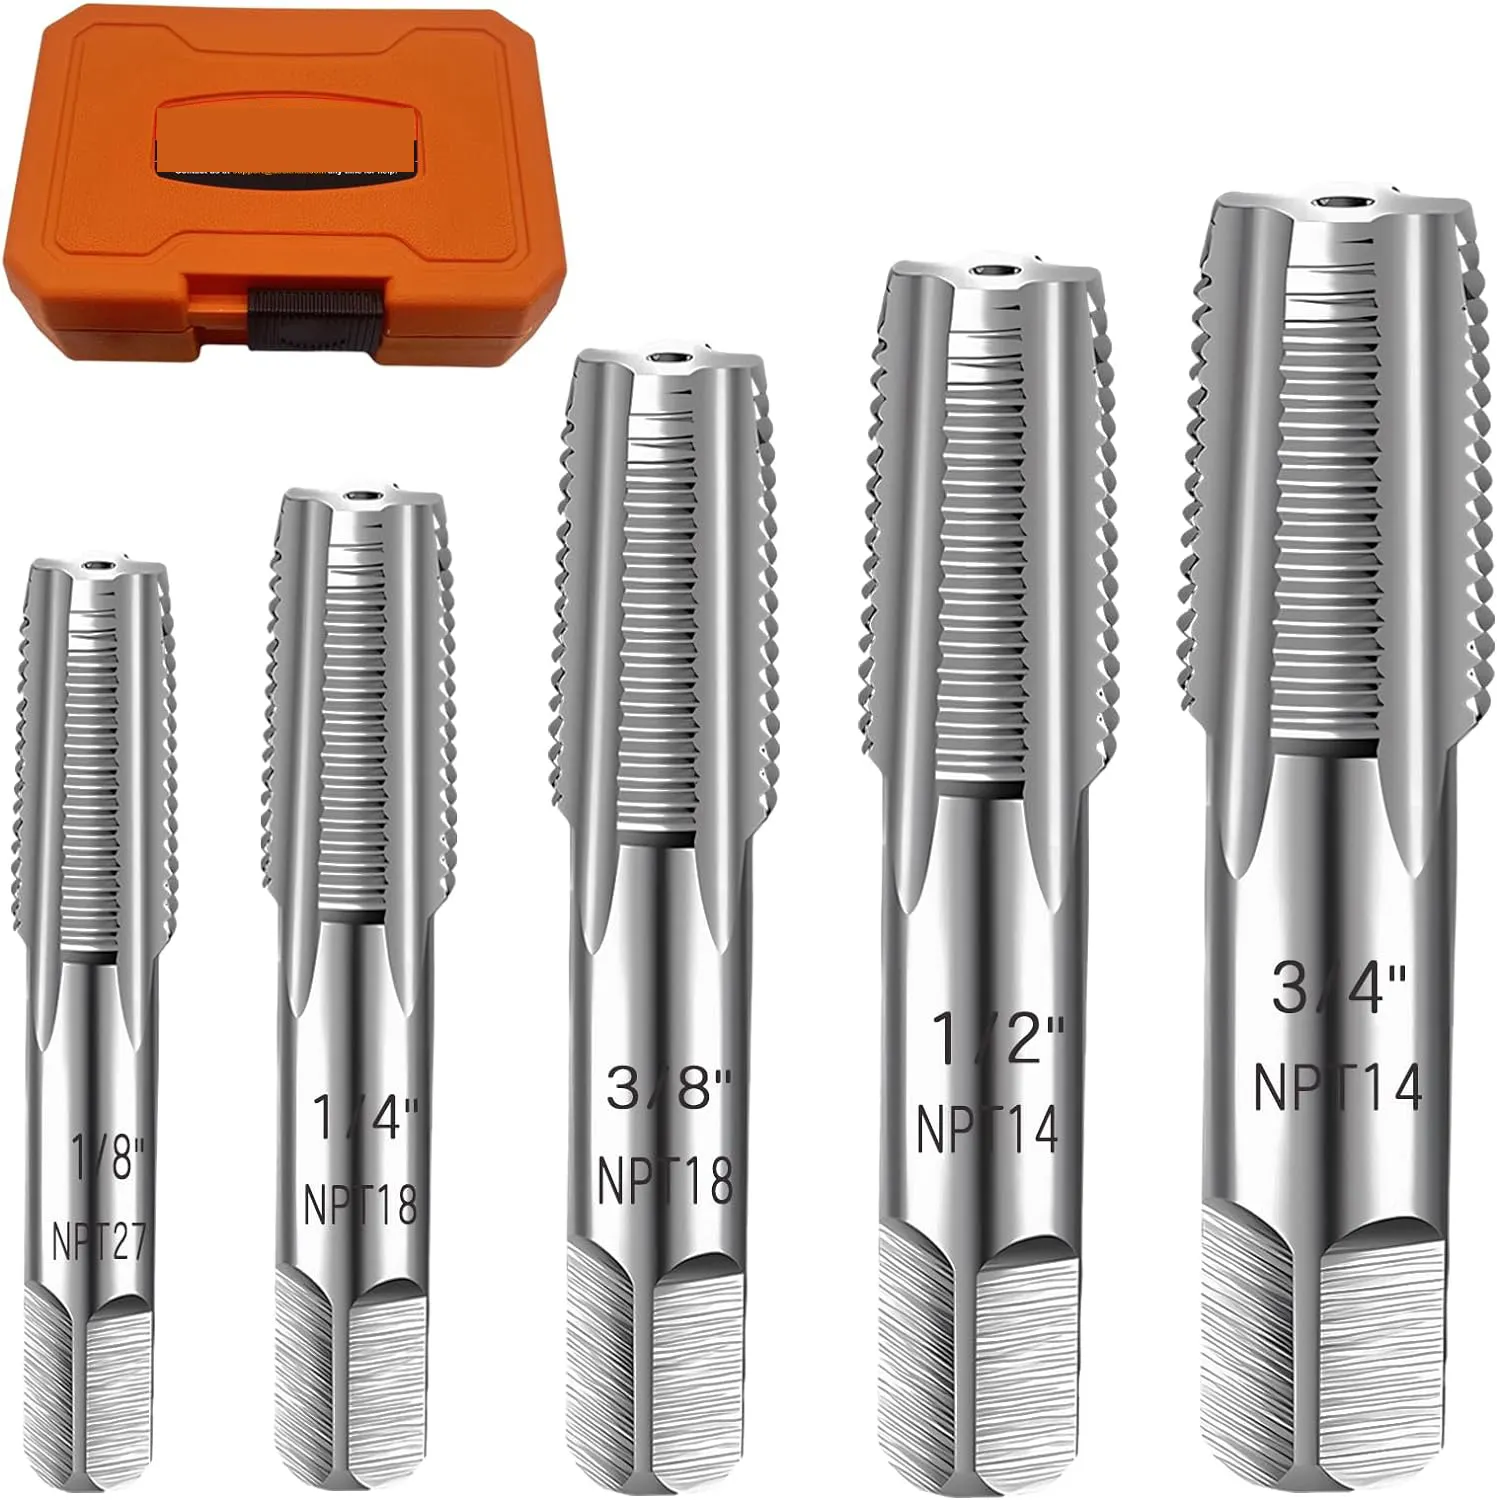 5-Piece NPT Pipe Tap Set, Precision Carbon Steel NPT Tap Set for Clean Accurate Threads, 3/4", 1/2", 3/8", 1/4", 1/8" NPT Tap